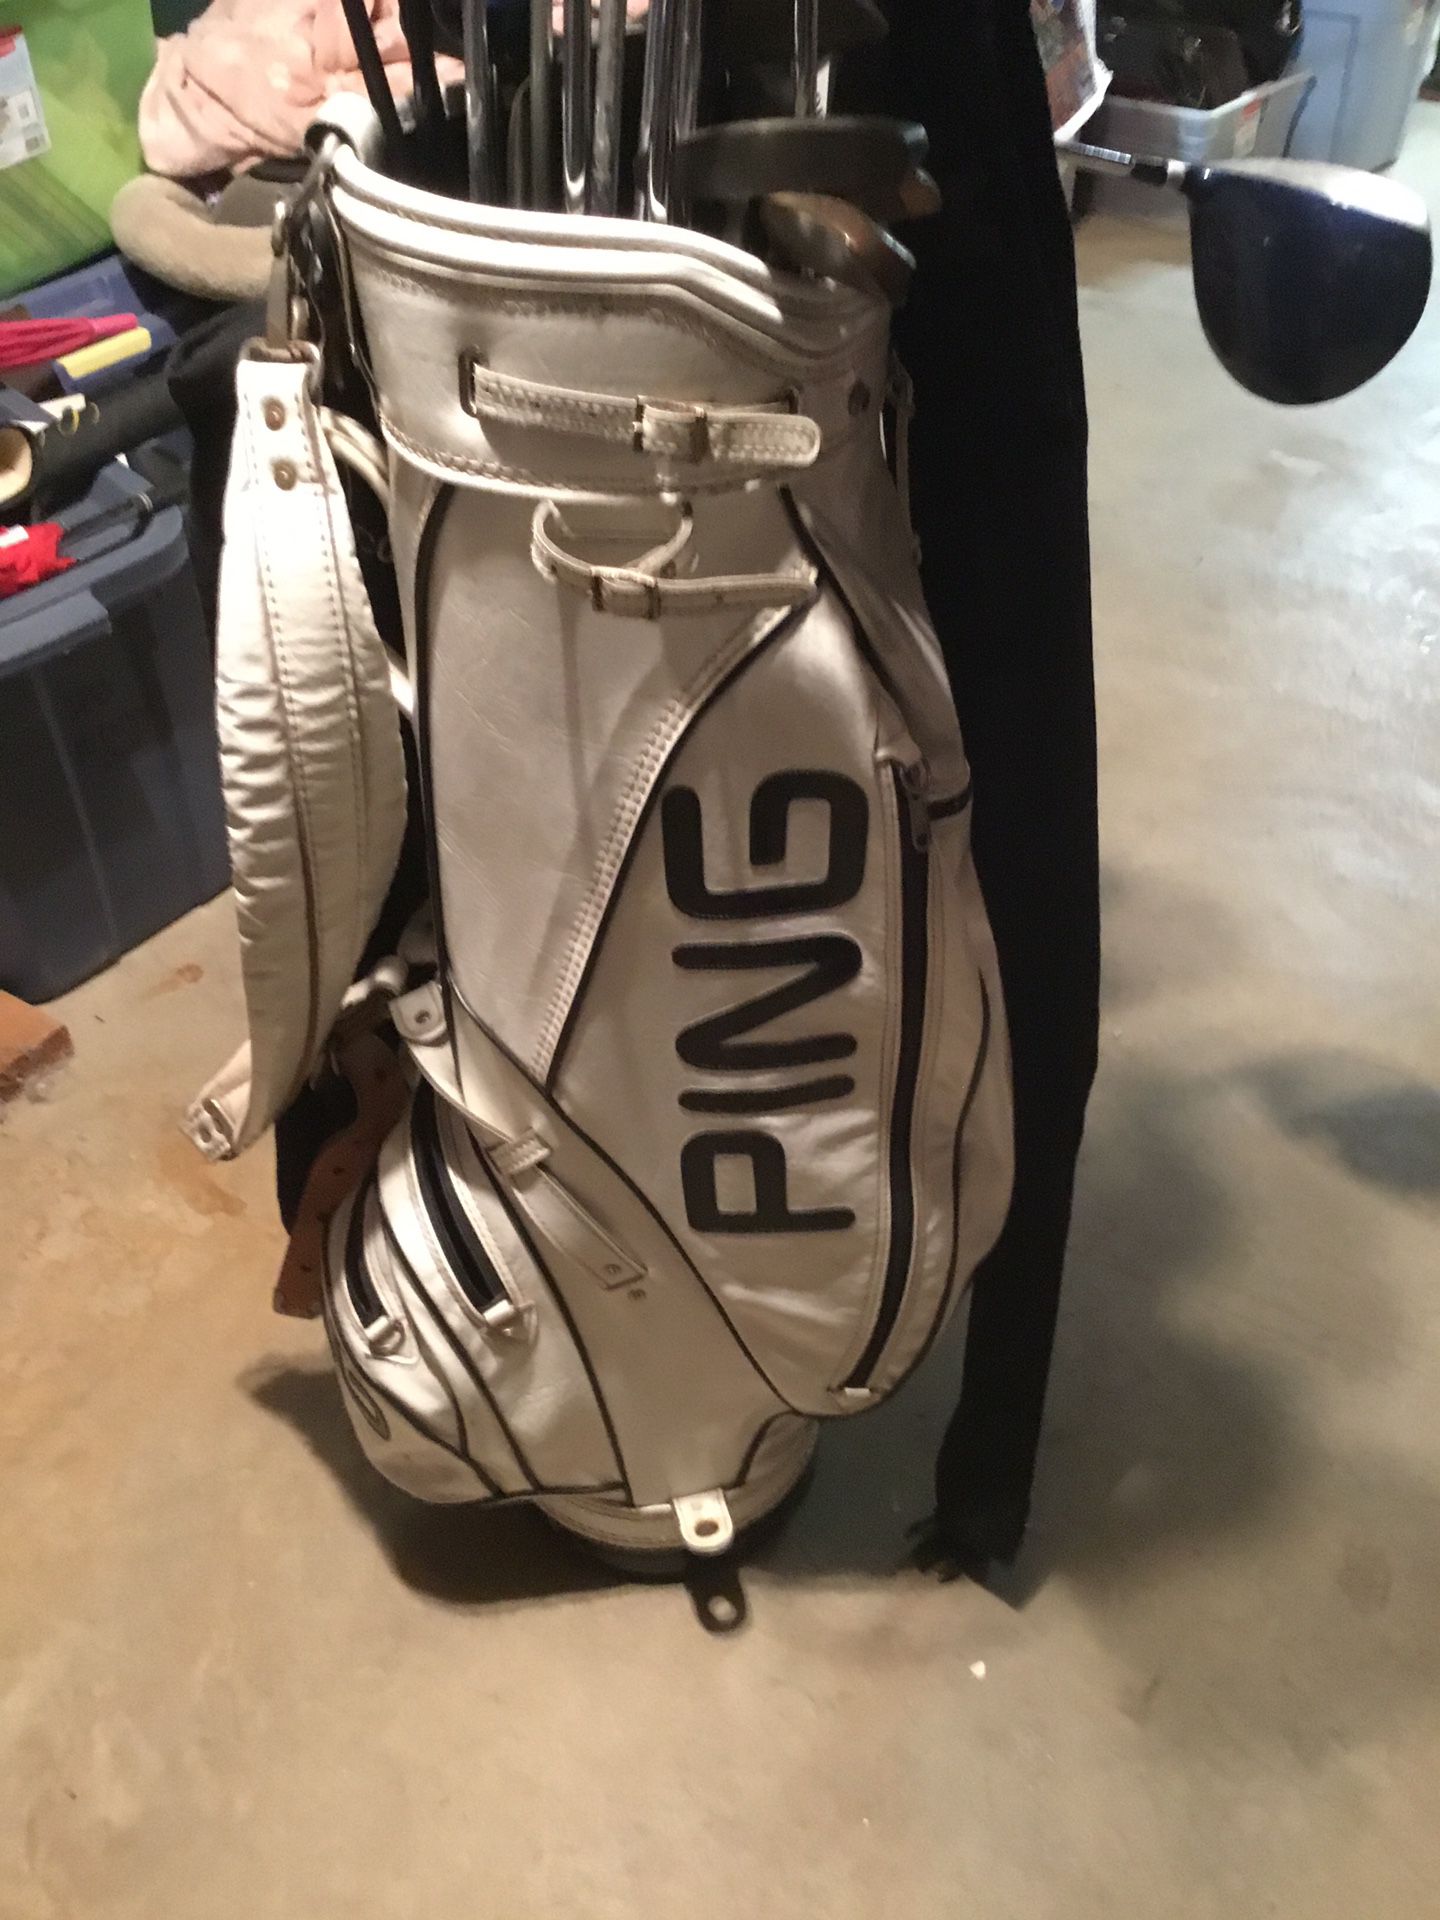 GOLF EQUIPMENT FOR SALE